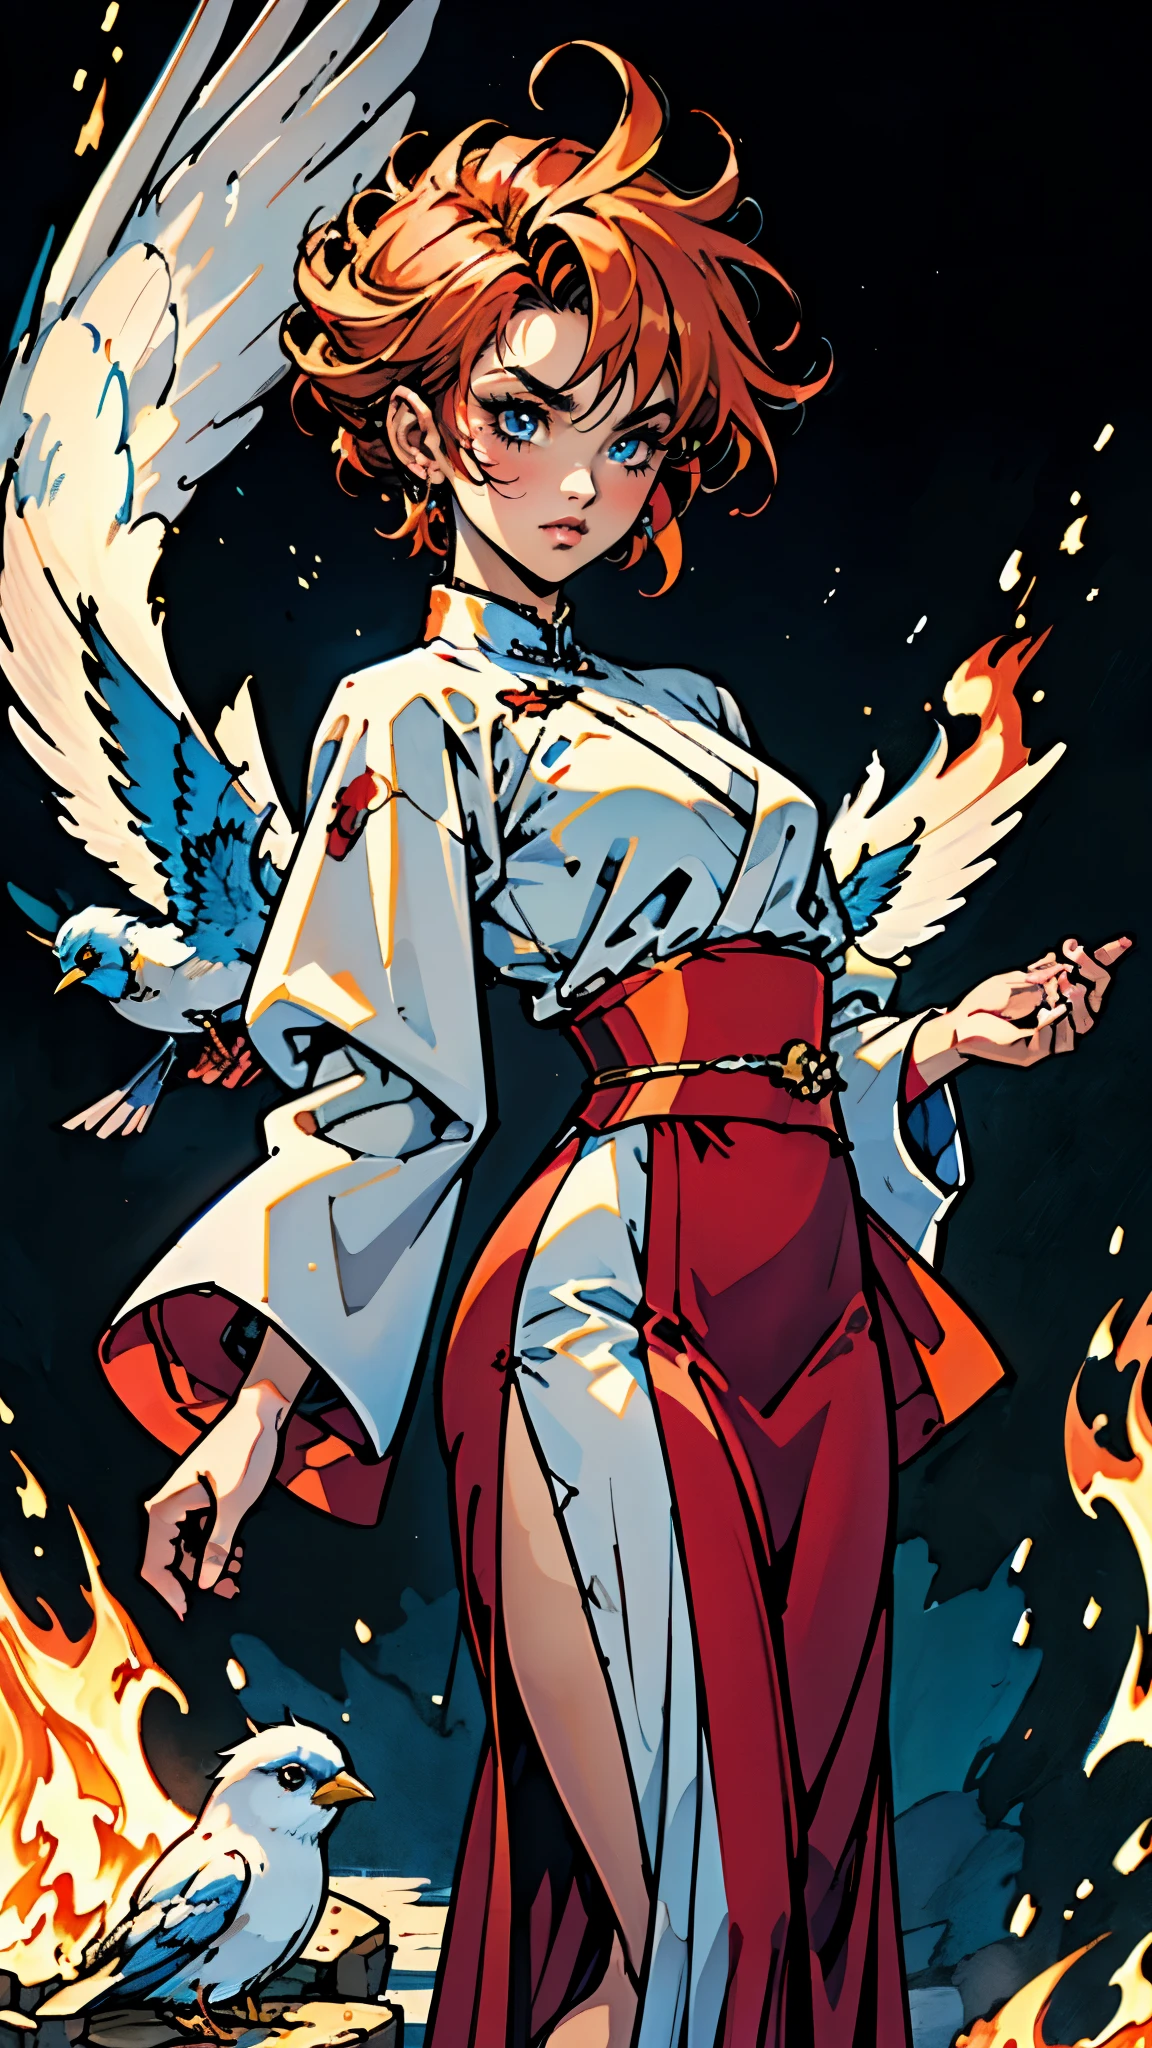 ((A woman with tousled vibrant red short hair, side-swept bangs, sharply arched eyebrows, sharp upward-arched thick eyebrows, sharp gaze, slender elongated face, a slim figure, a fantasy martial arts-style loose solid-color Daoist robe, wide billowing sleeves, a voluminous long skirt, orange as the main color, complemented by blue accents, a small bird formed of flames flies beside her, the scene is set in a fantasy-style Chinese lakeside courtyard)), this character embodies a finely crafted a fantasy martial arts practitioner in anime style, exquisite and mature manga art style, feminine, high definition, best quality, highres, ultra-detailed, ultra-fine painting, extremely delicate, professional, perfect body proportions, golden ratio, anatomically correct, symmetrical face, extremely detailed eyes and face, high quality eyes, creativity, RAW photo, UHD, 32k, Natural light, cinematic lighting, masterpiece-anatomy-perfect, masterpiece:1.5